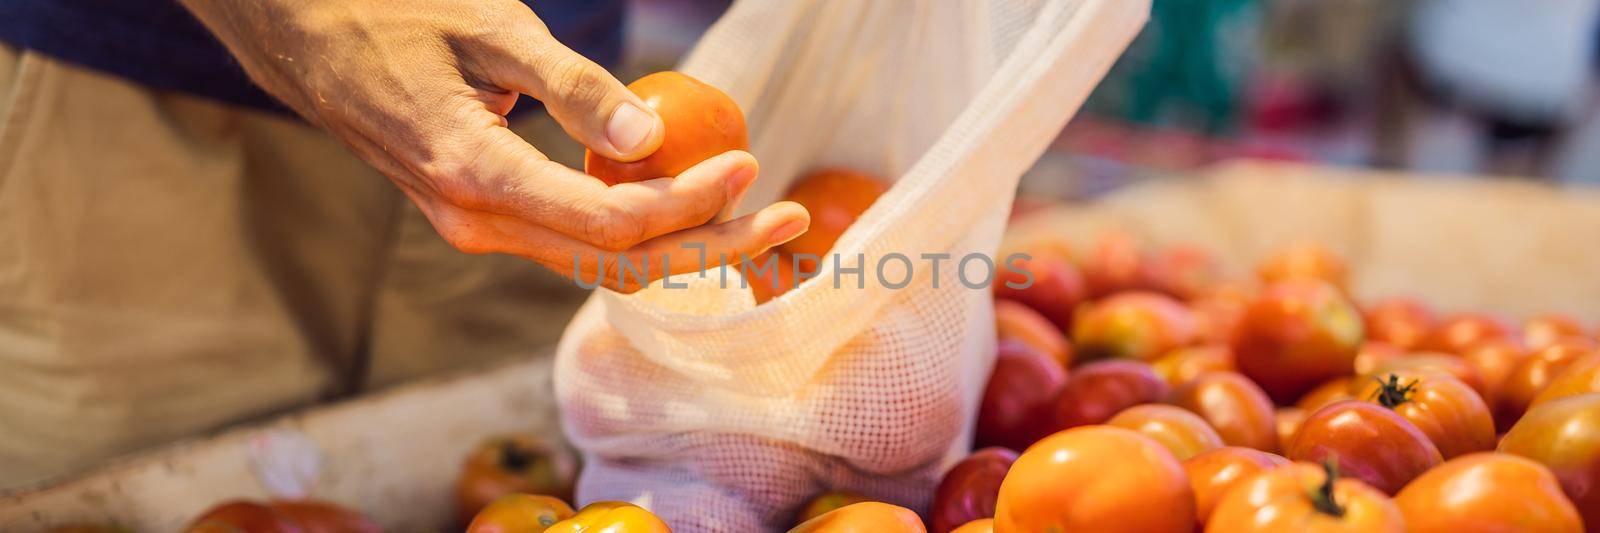 Man chooses tomatoes in a supermarket without using a plastic bag. Reusable bag for buying vegetables. Zero waste concept BANNER, LONG FORMAT by galitskaya